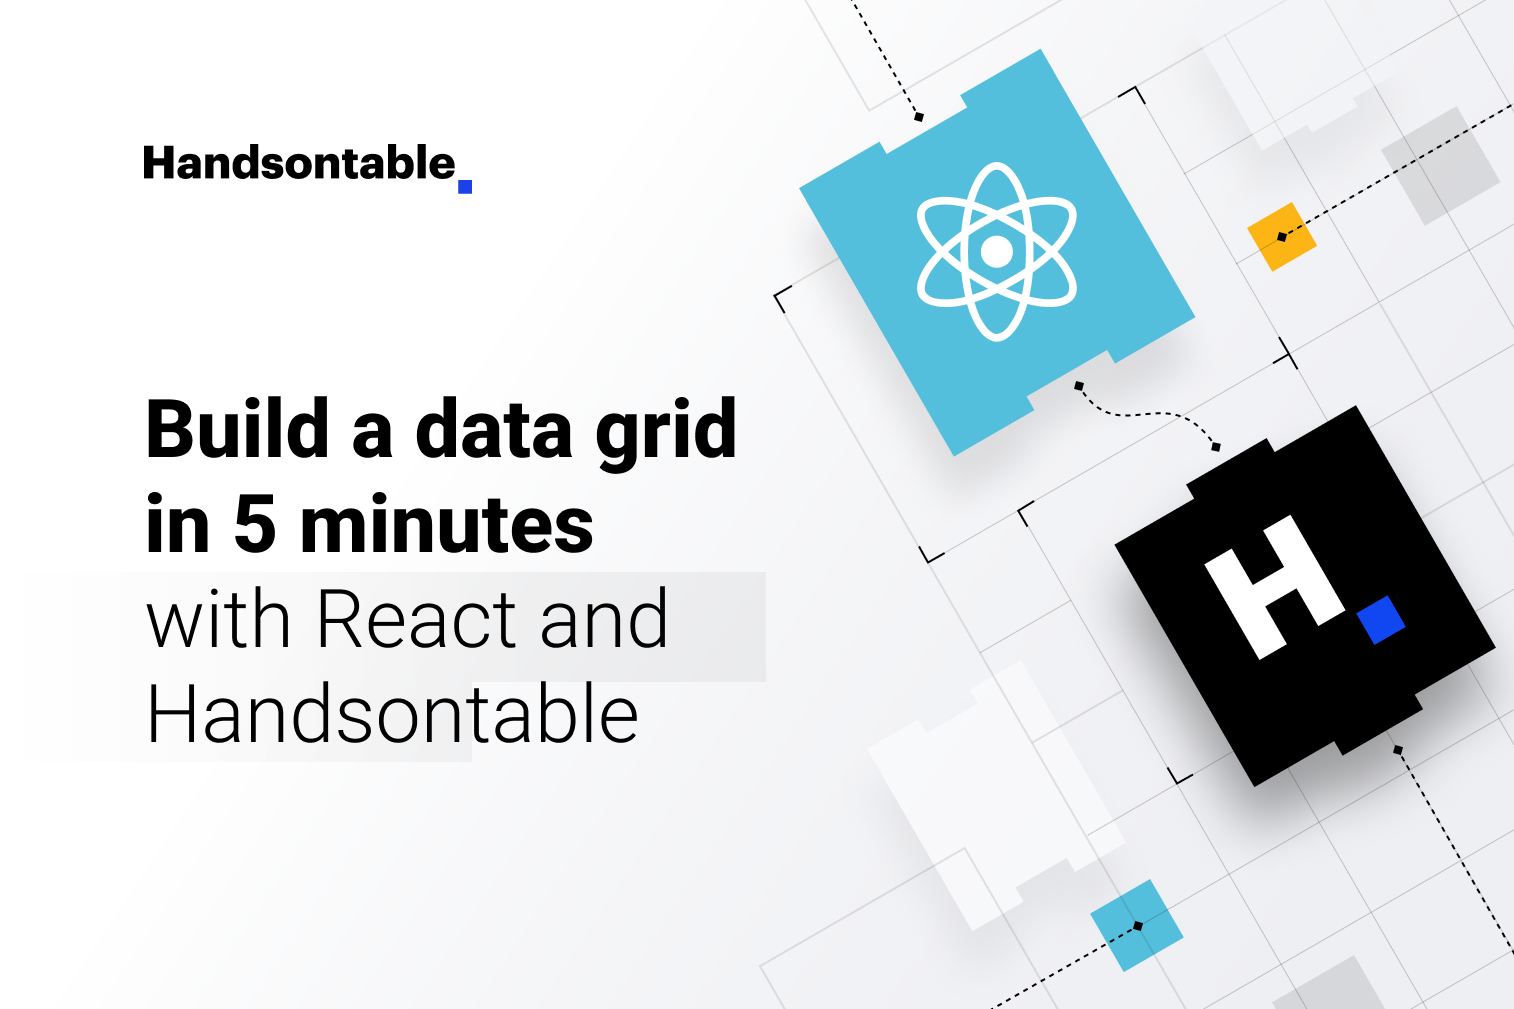 Illustration for a blog post - - Build a data grid in 5 minutes with React and Handsontable